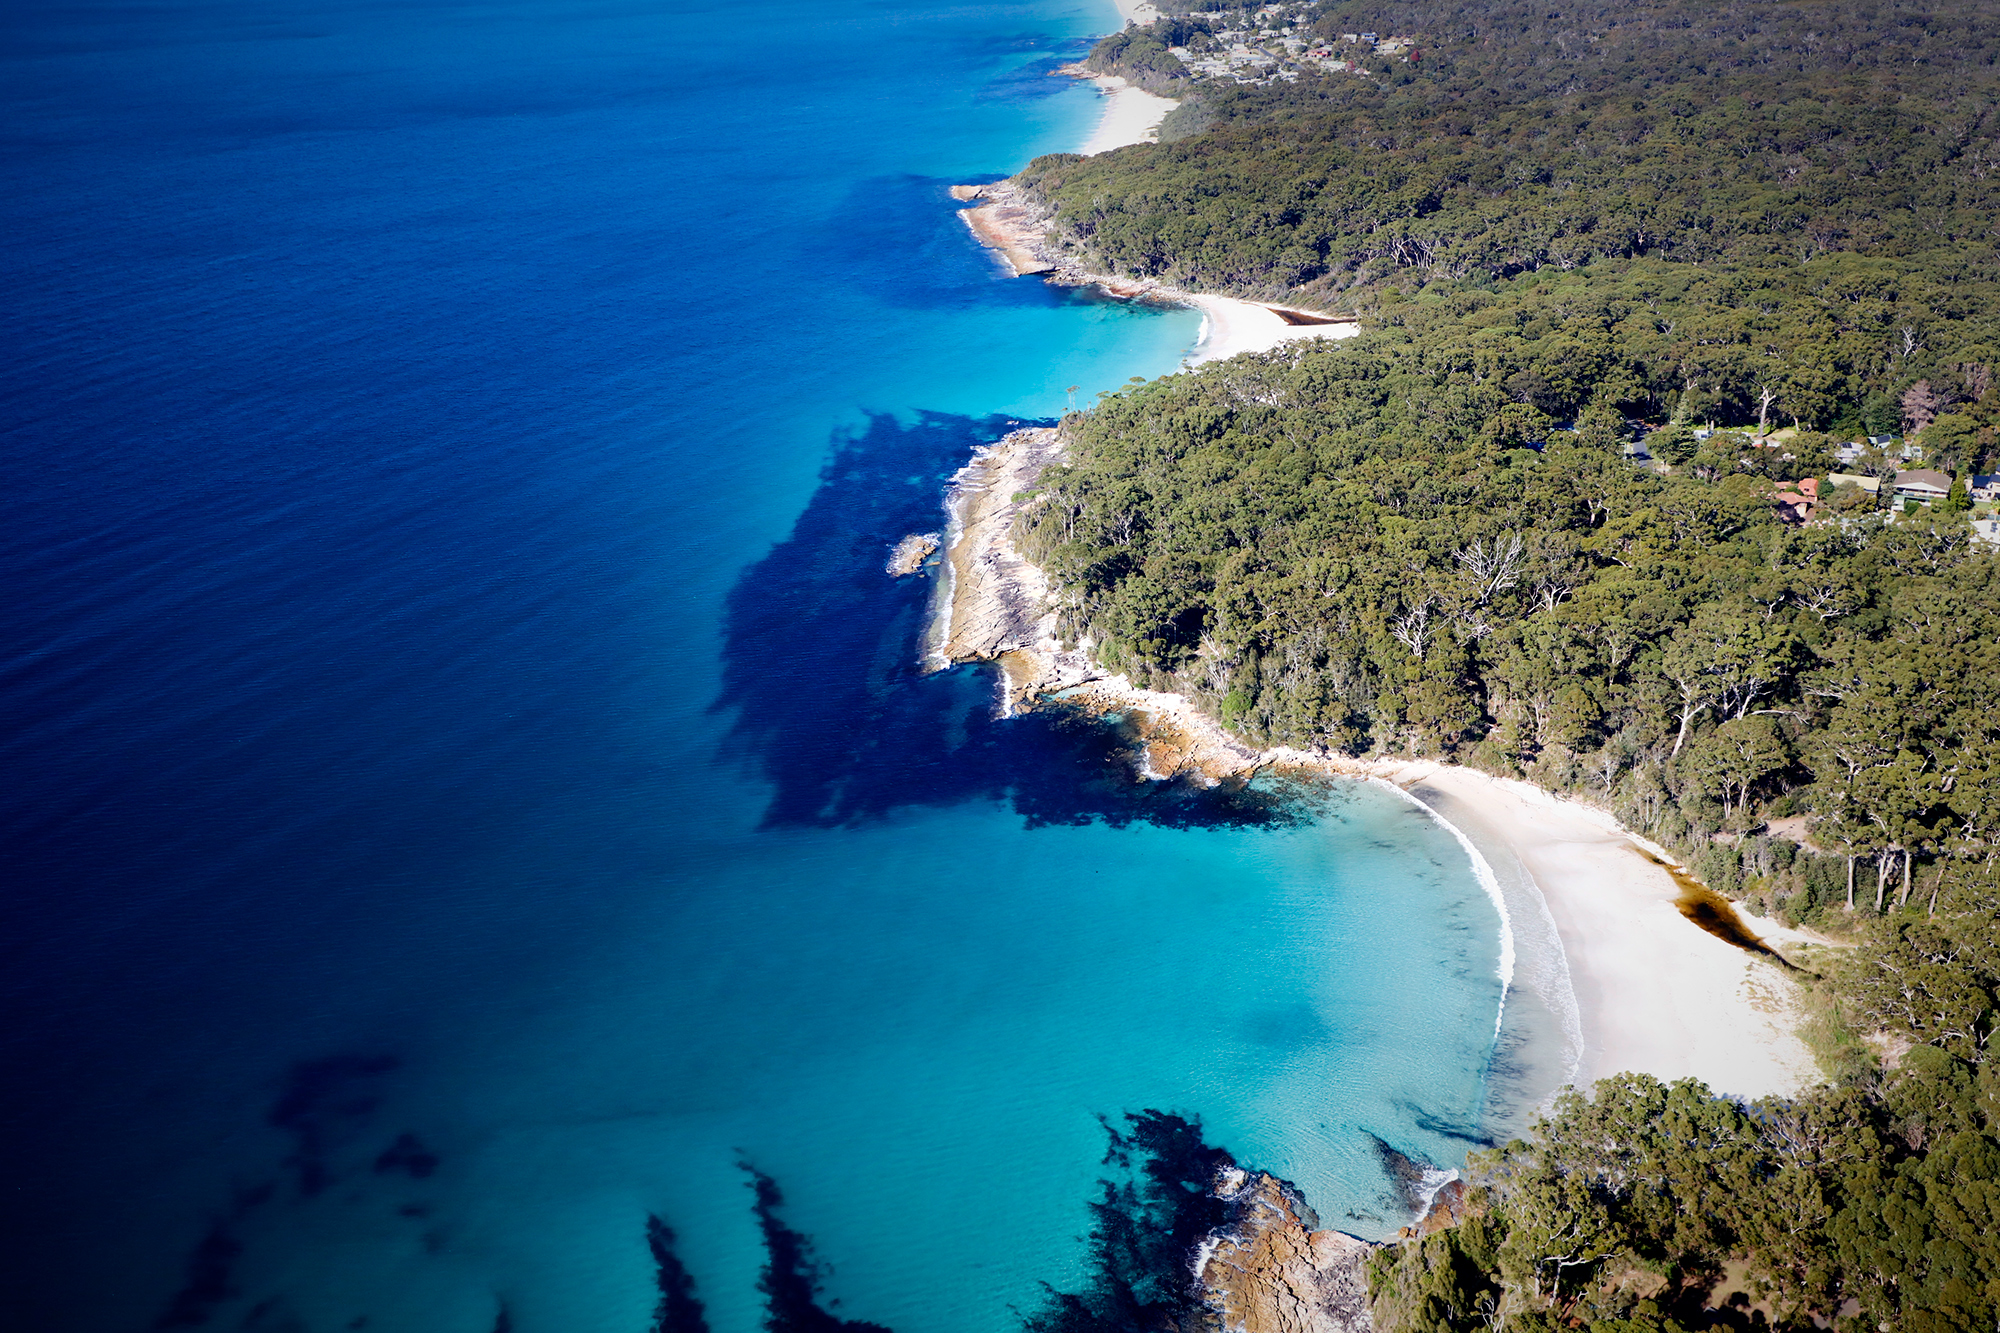 Yes, this place exists. Jervis Bay 3 hours south of Sydney